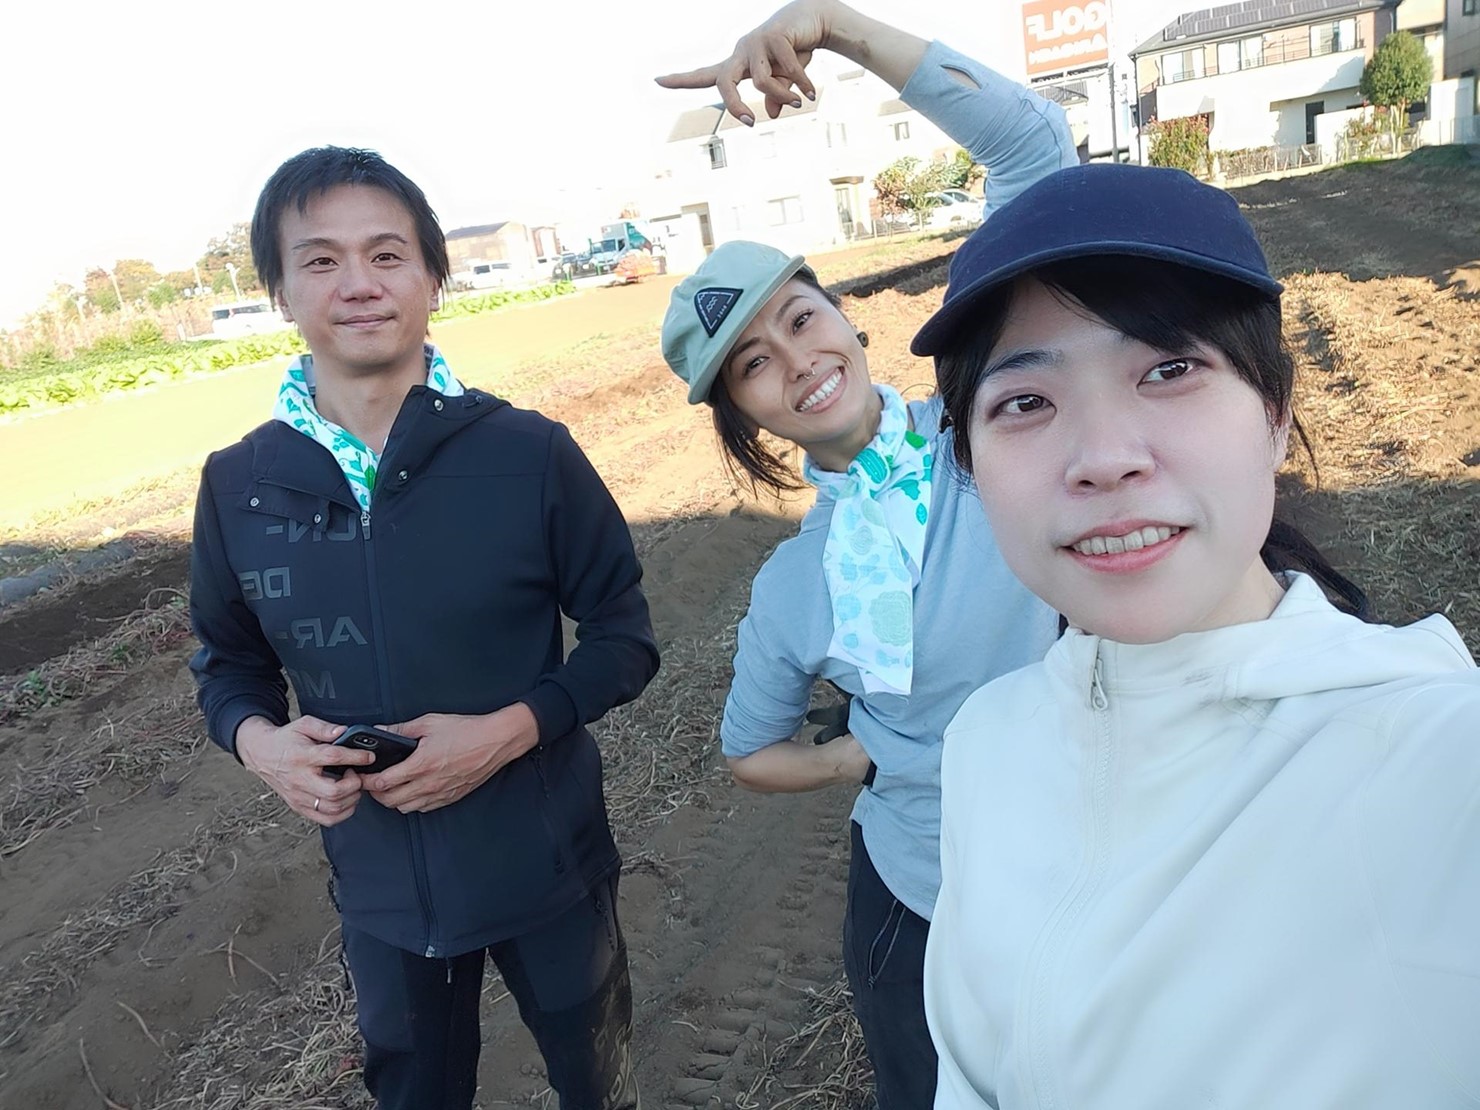 Kyoko Yazaki, Riko Yoshimura and Takeshi Kurisaki from our Deallus Tokyo office went out to the greater-Tokyo area to help out at a privately-owned farm that provides lunch vegetables for local elementary schools.